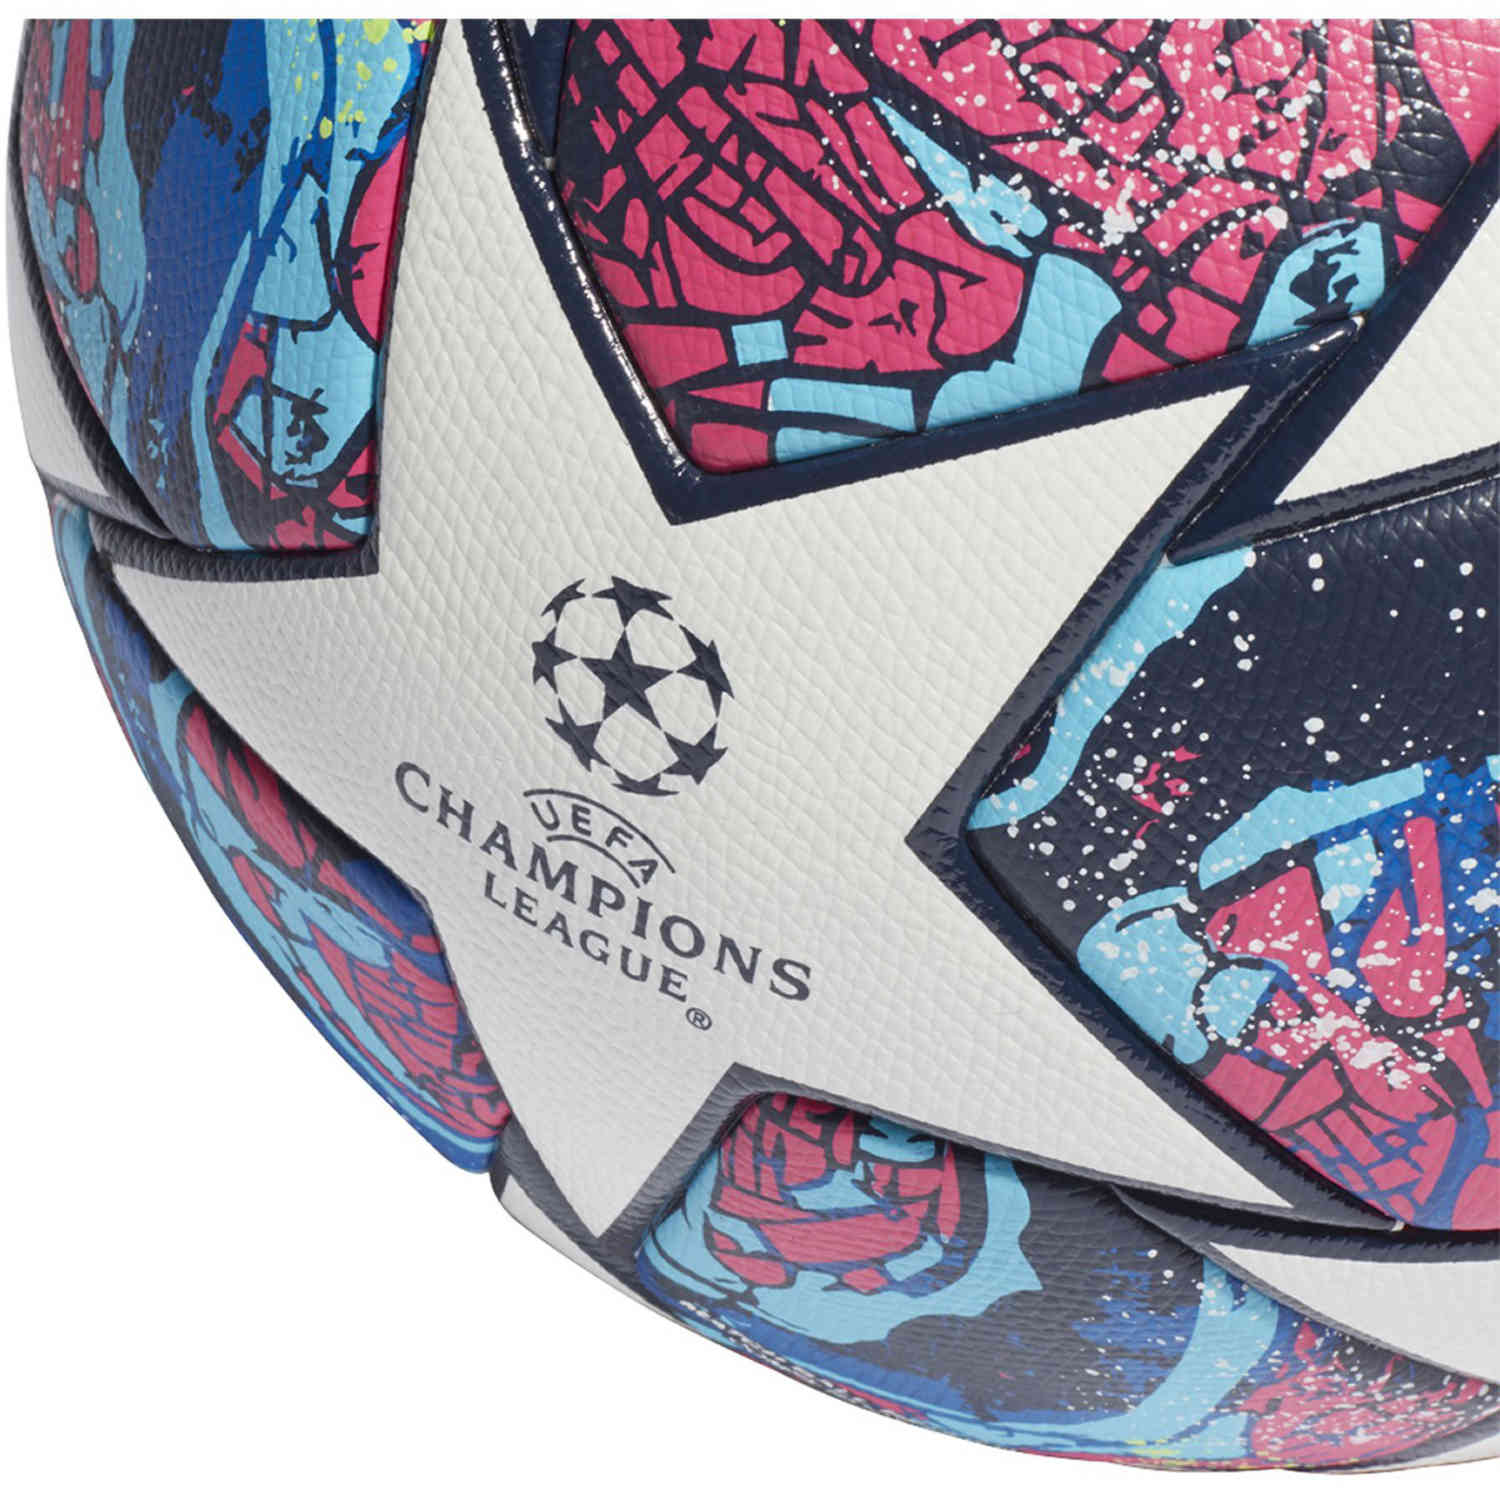 ucl finale istanbul competition ball